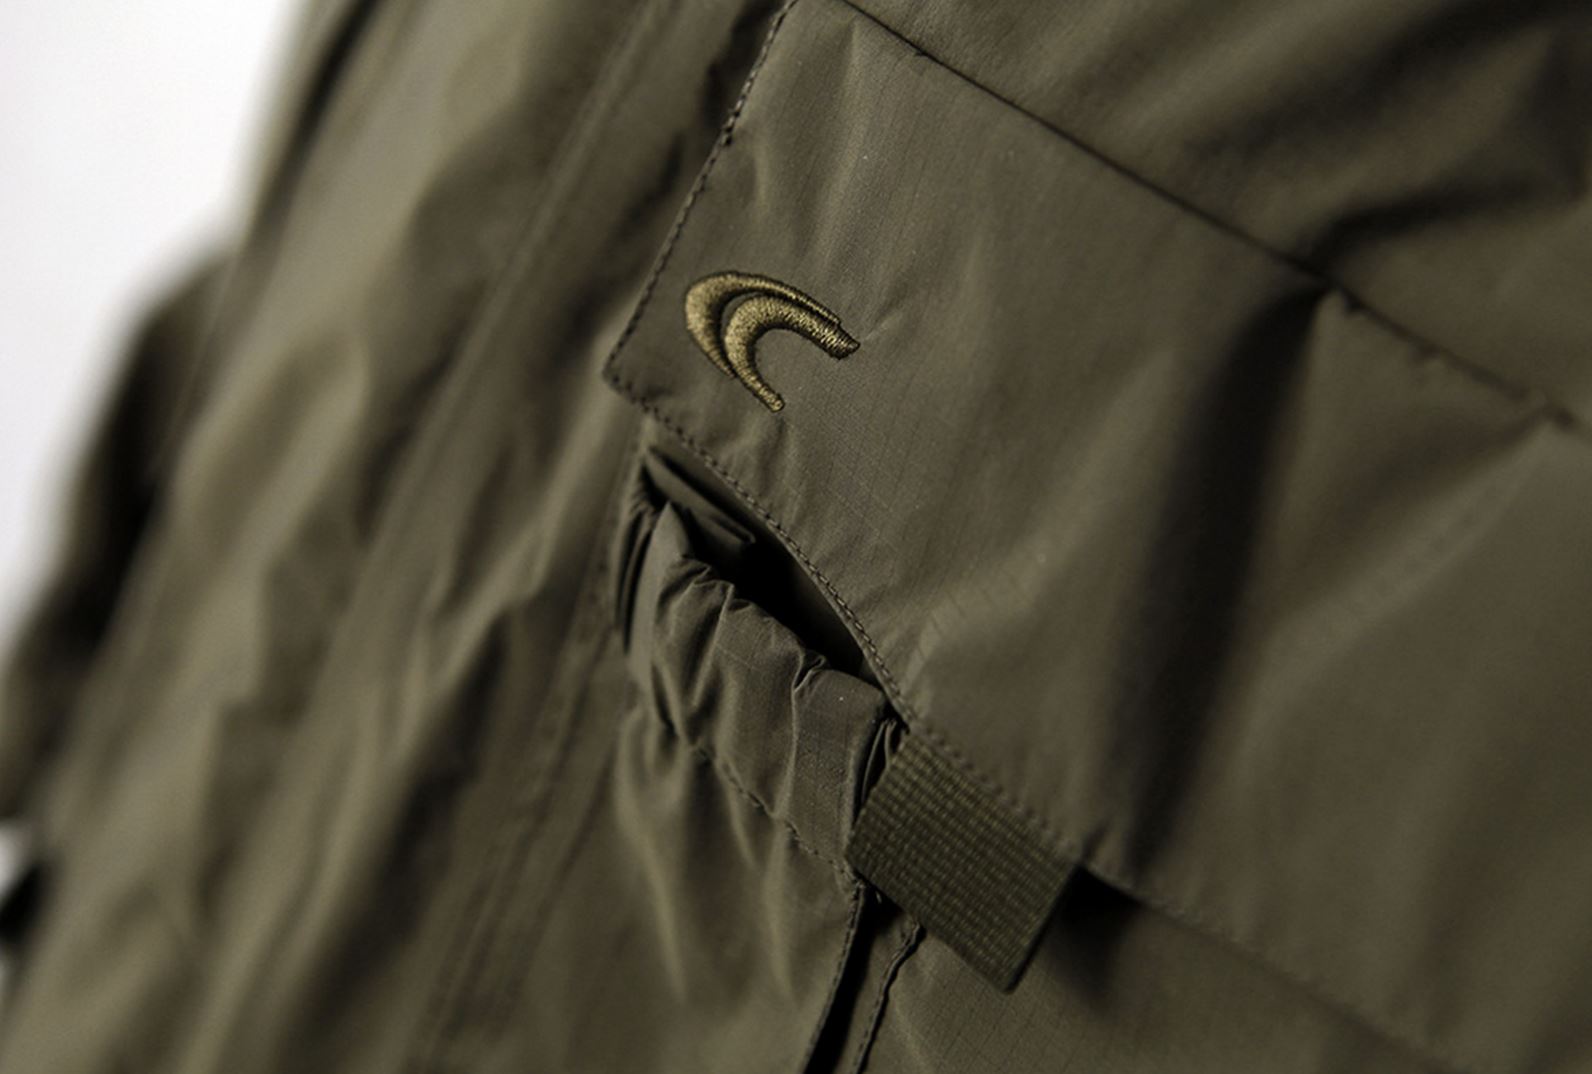 TRG GORE-TEX Rain Jacket Olive from Carinthia - buy here